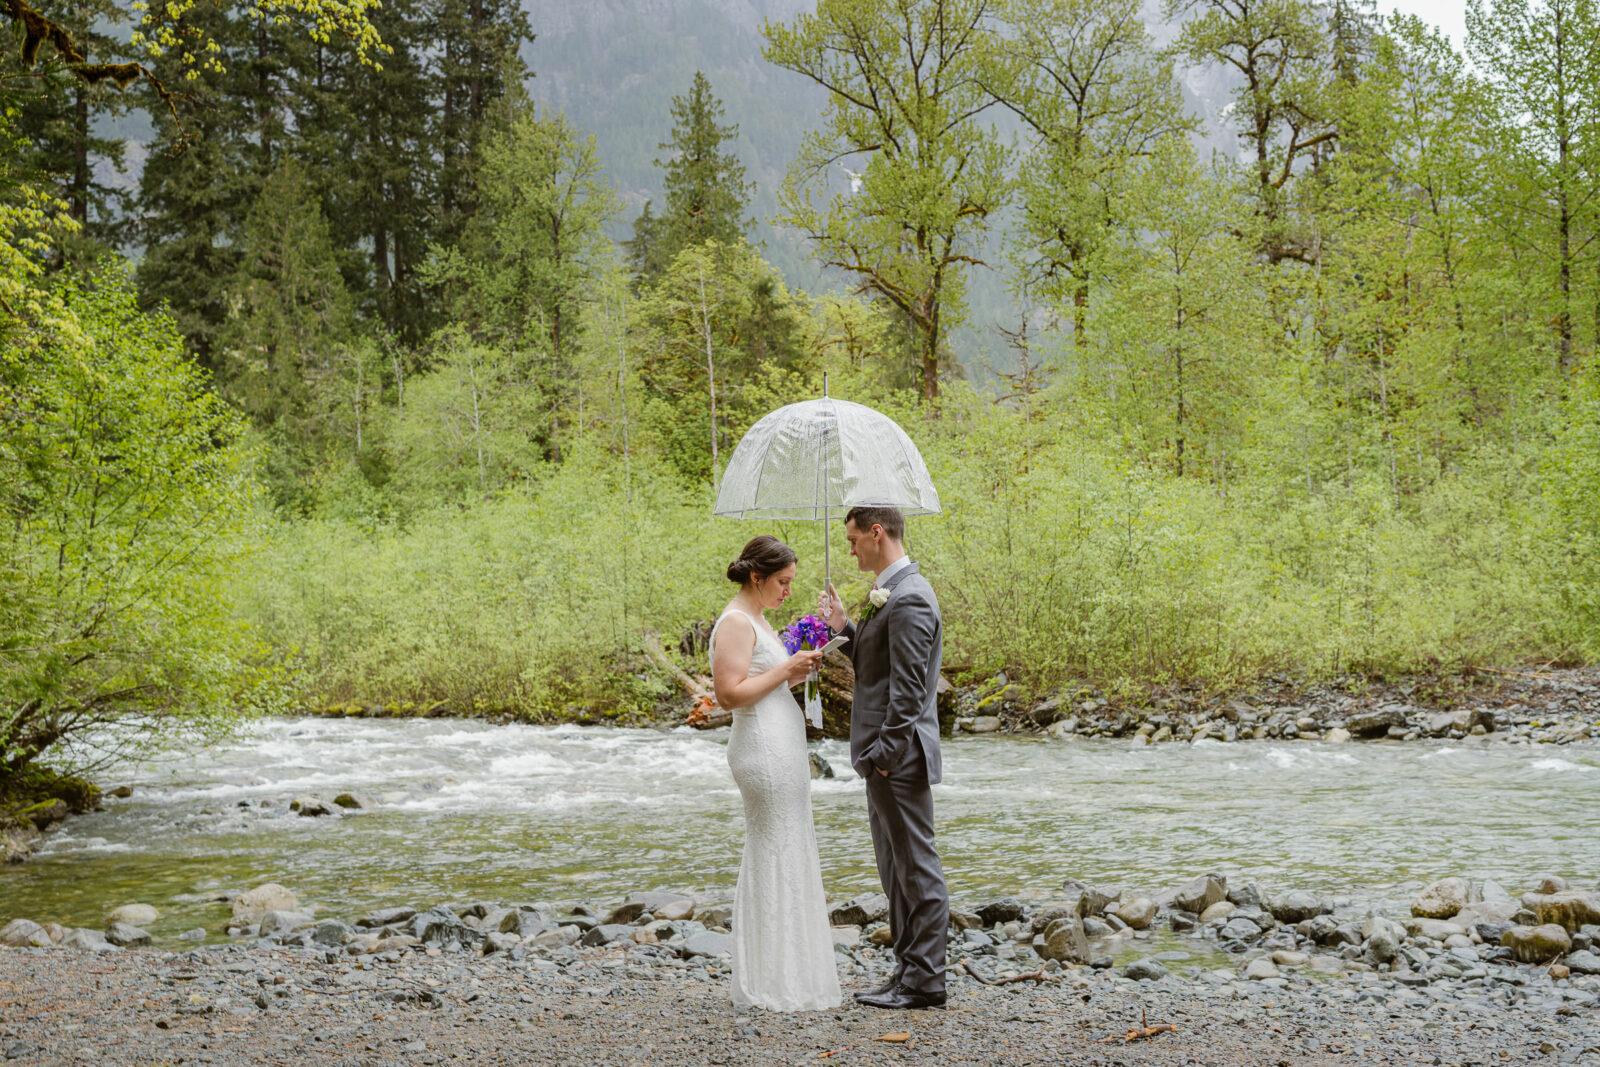 Rainy elopement day with outshined photography